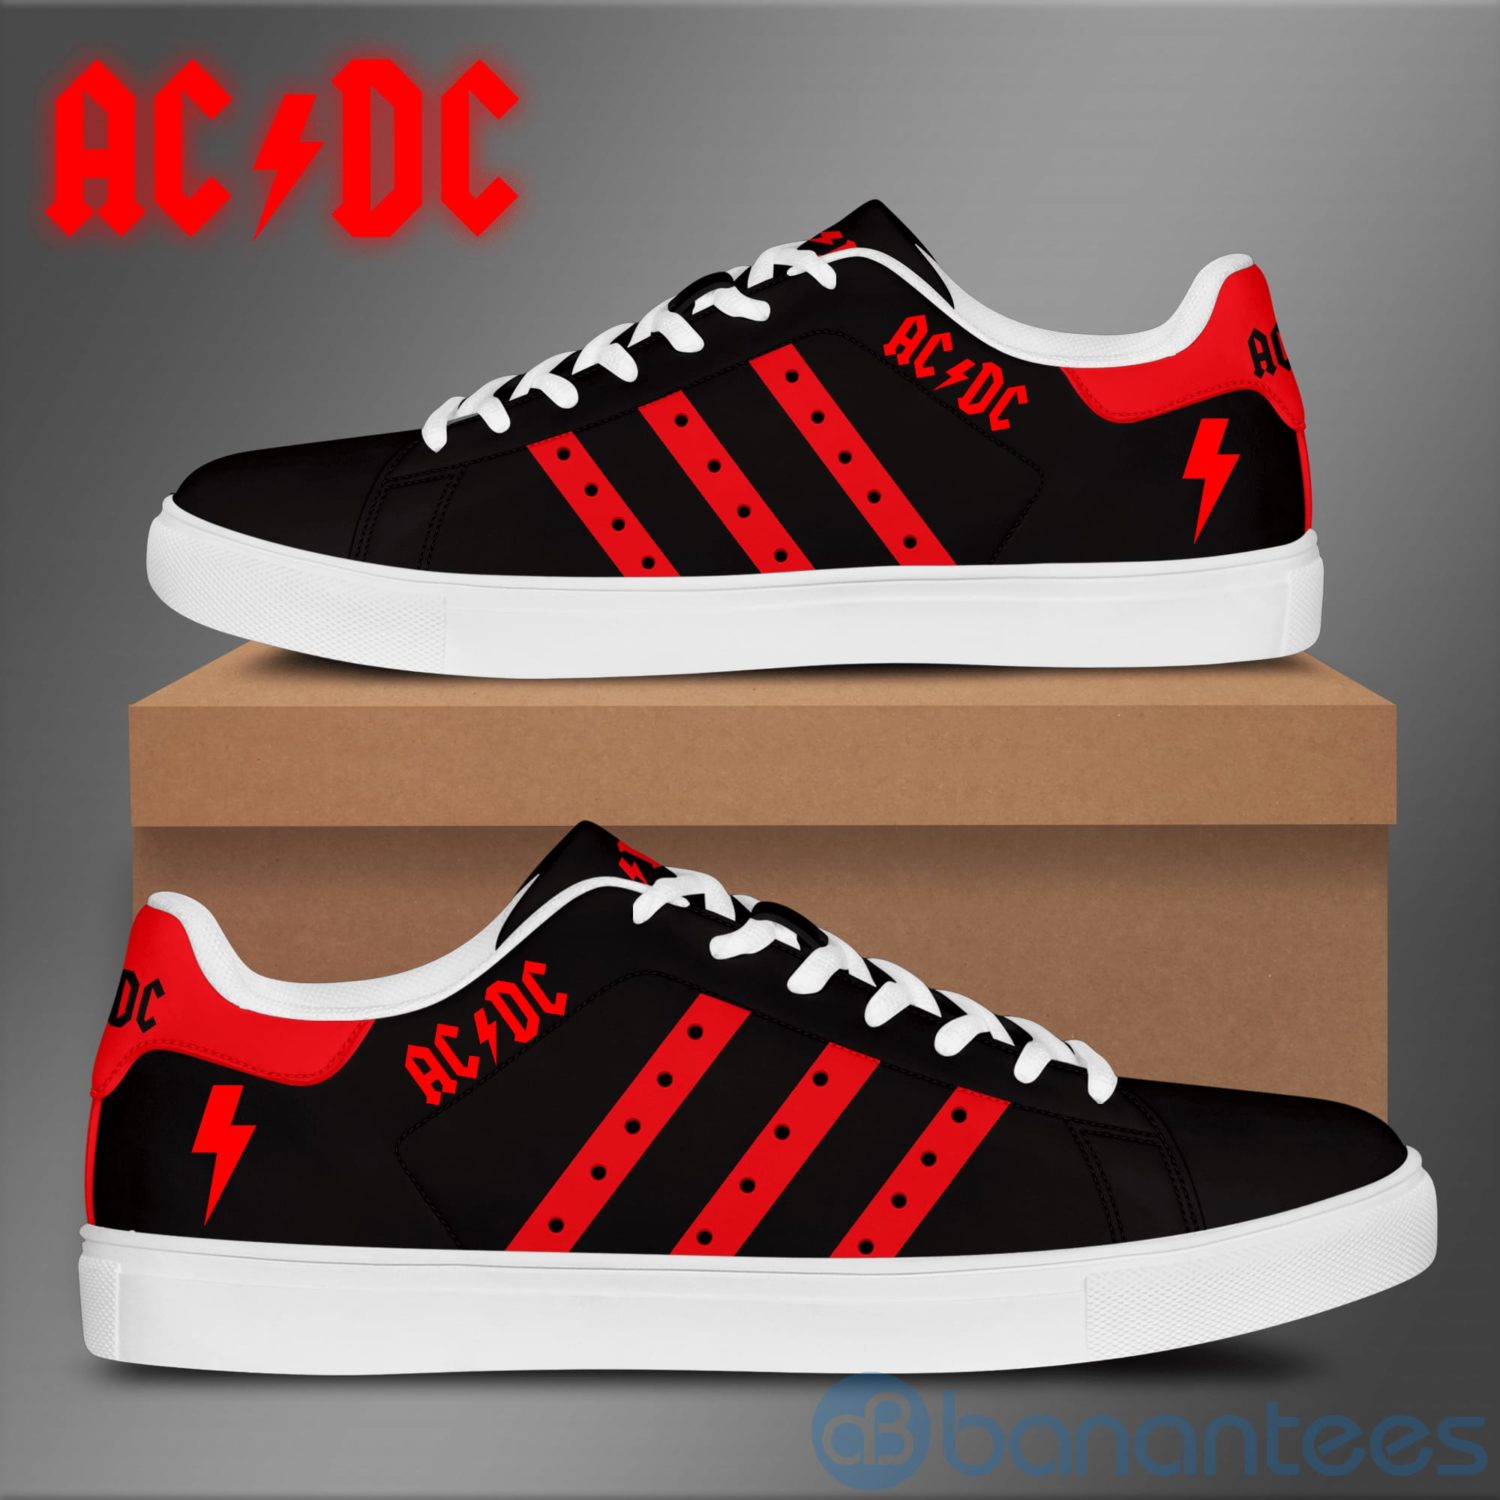 Acdc Red Striped Black Low Top Skate Shoes